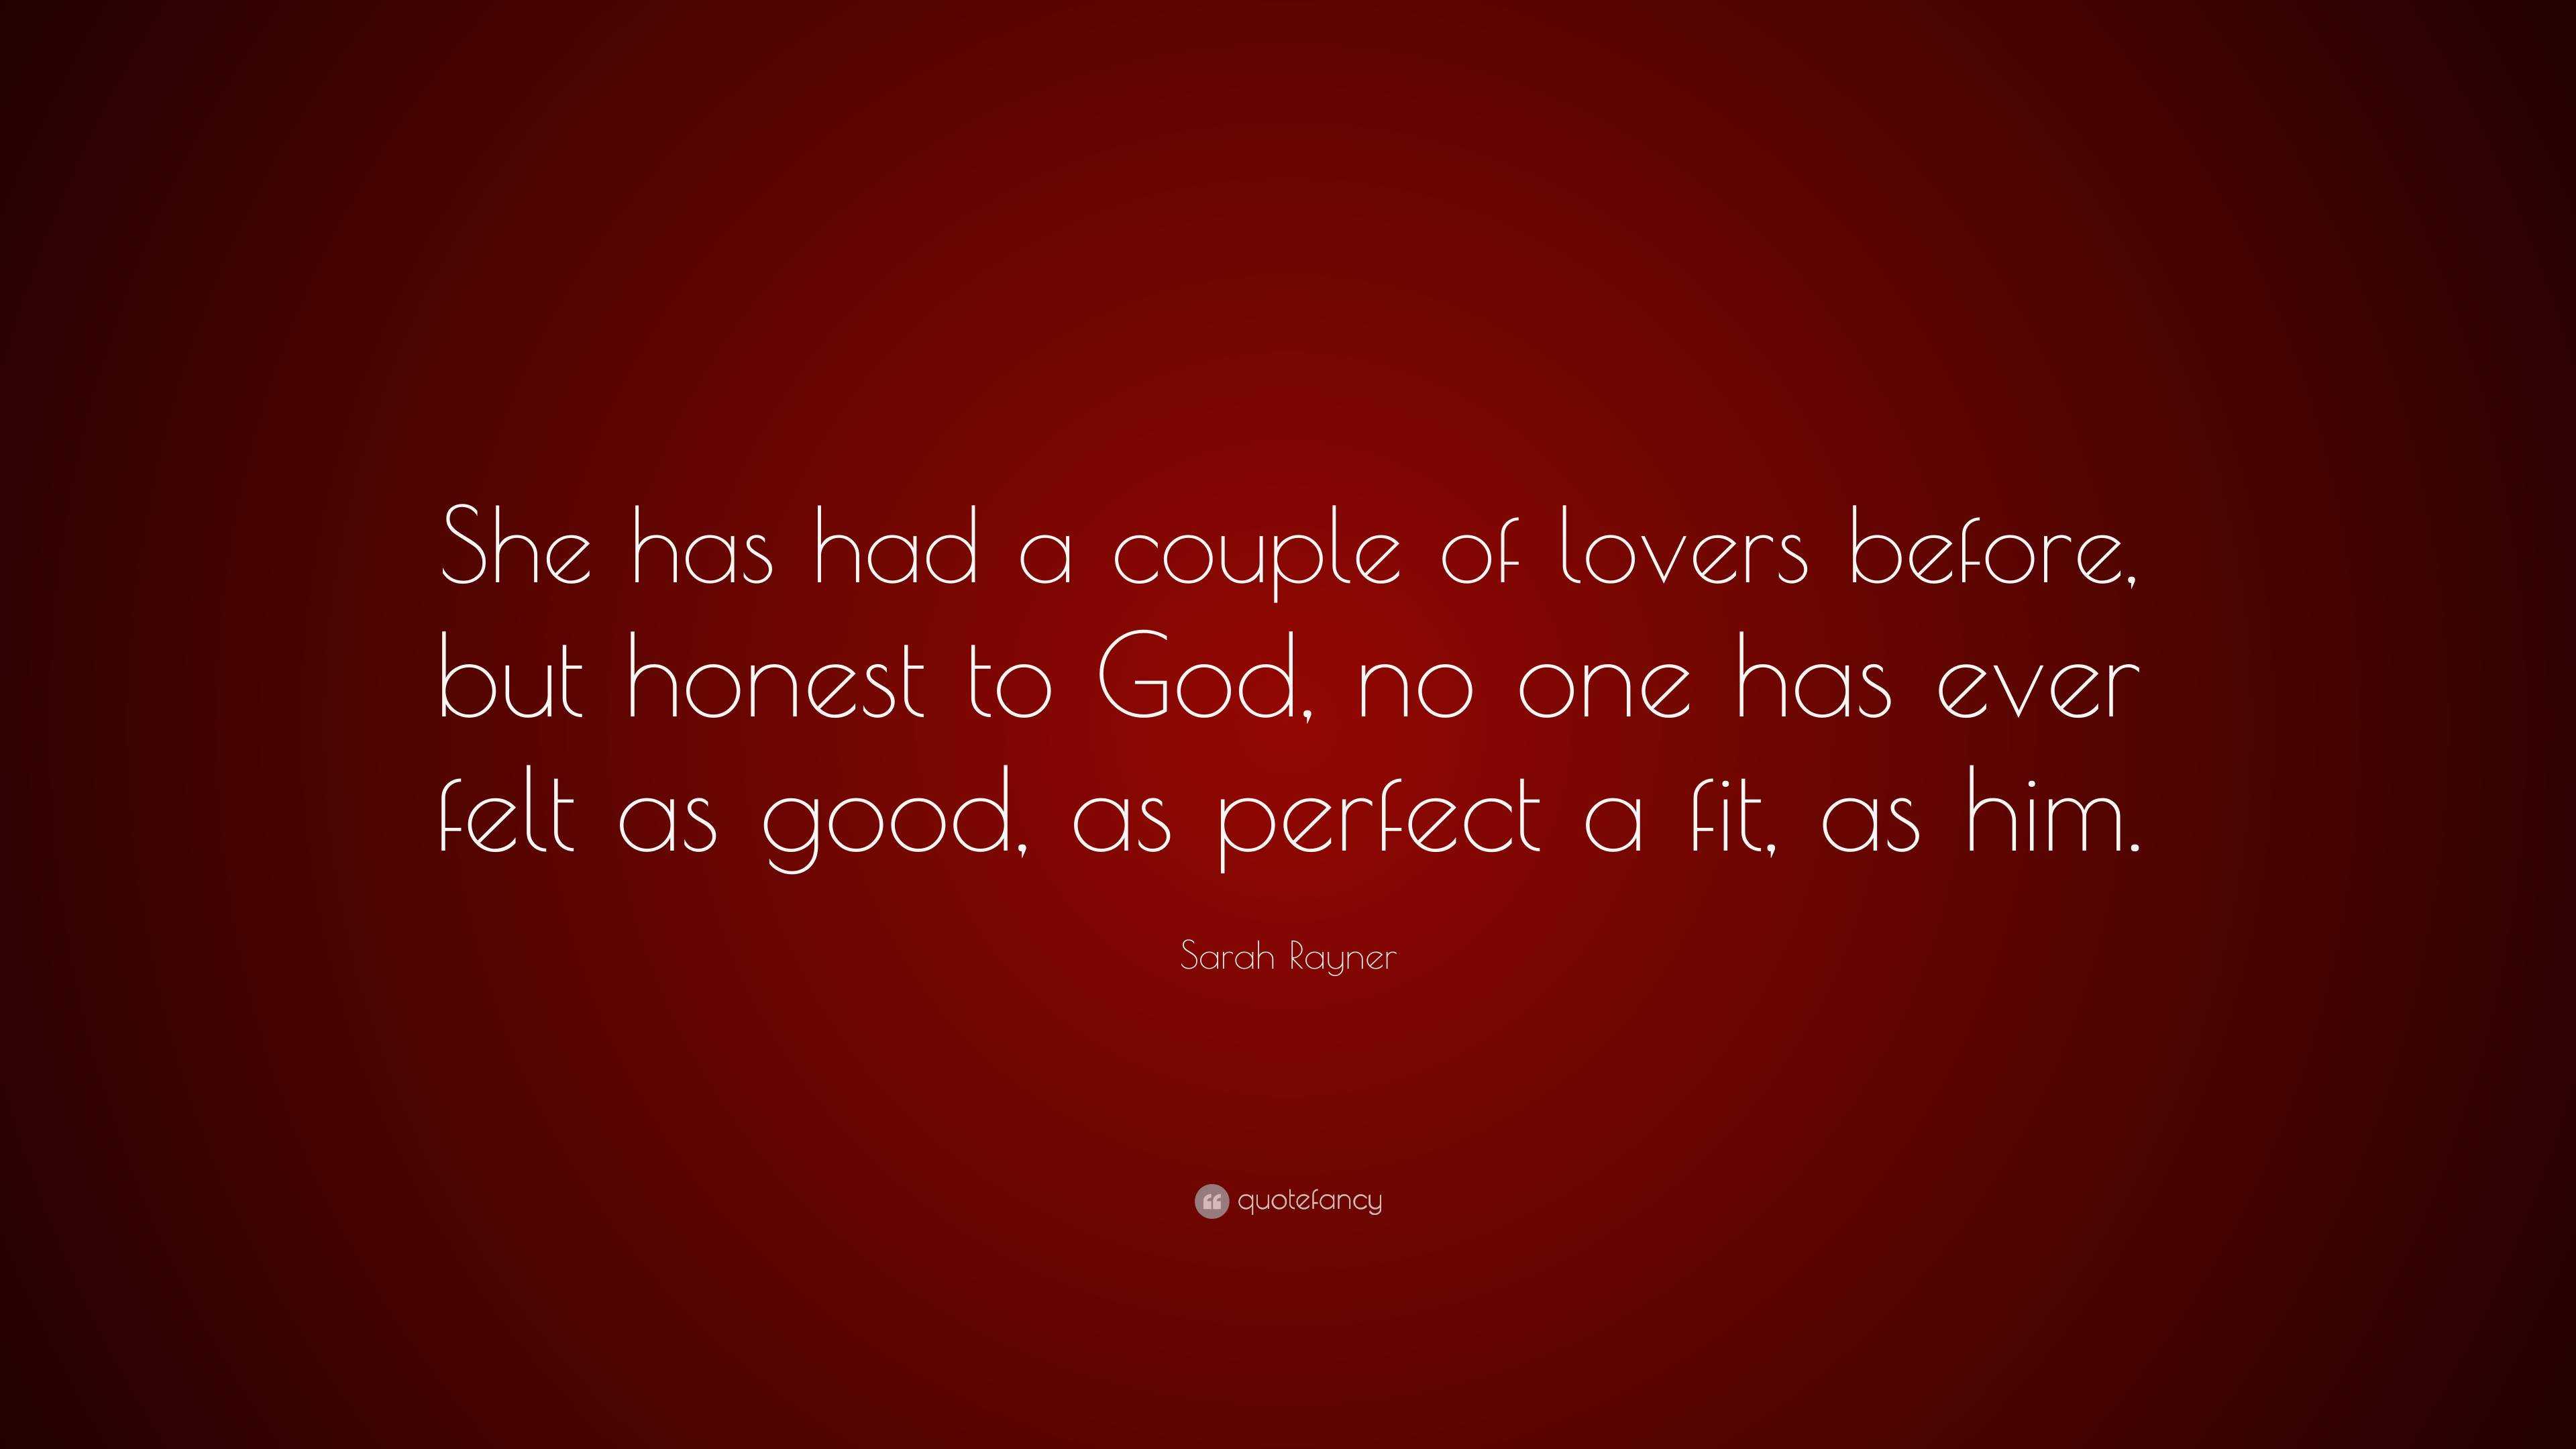 Sarah Rayner Quote: “She has had a couple of lovers before, but honest to  God, no